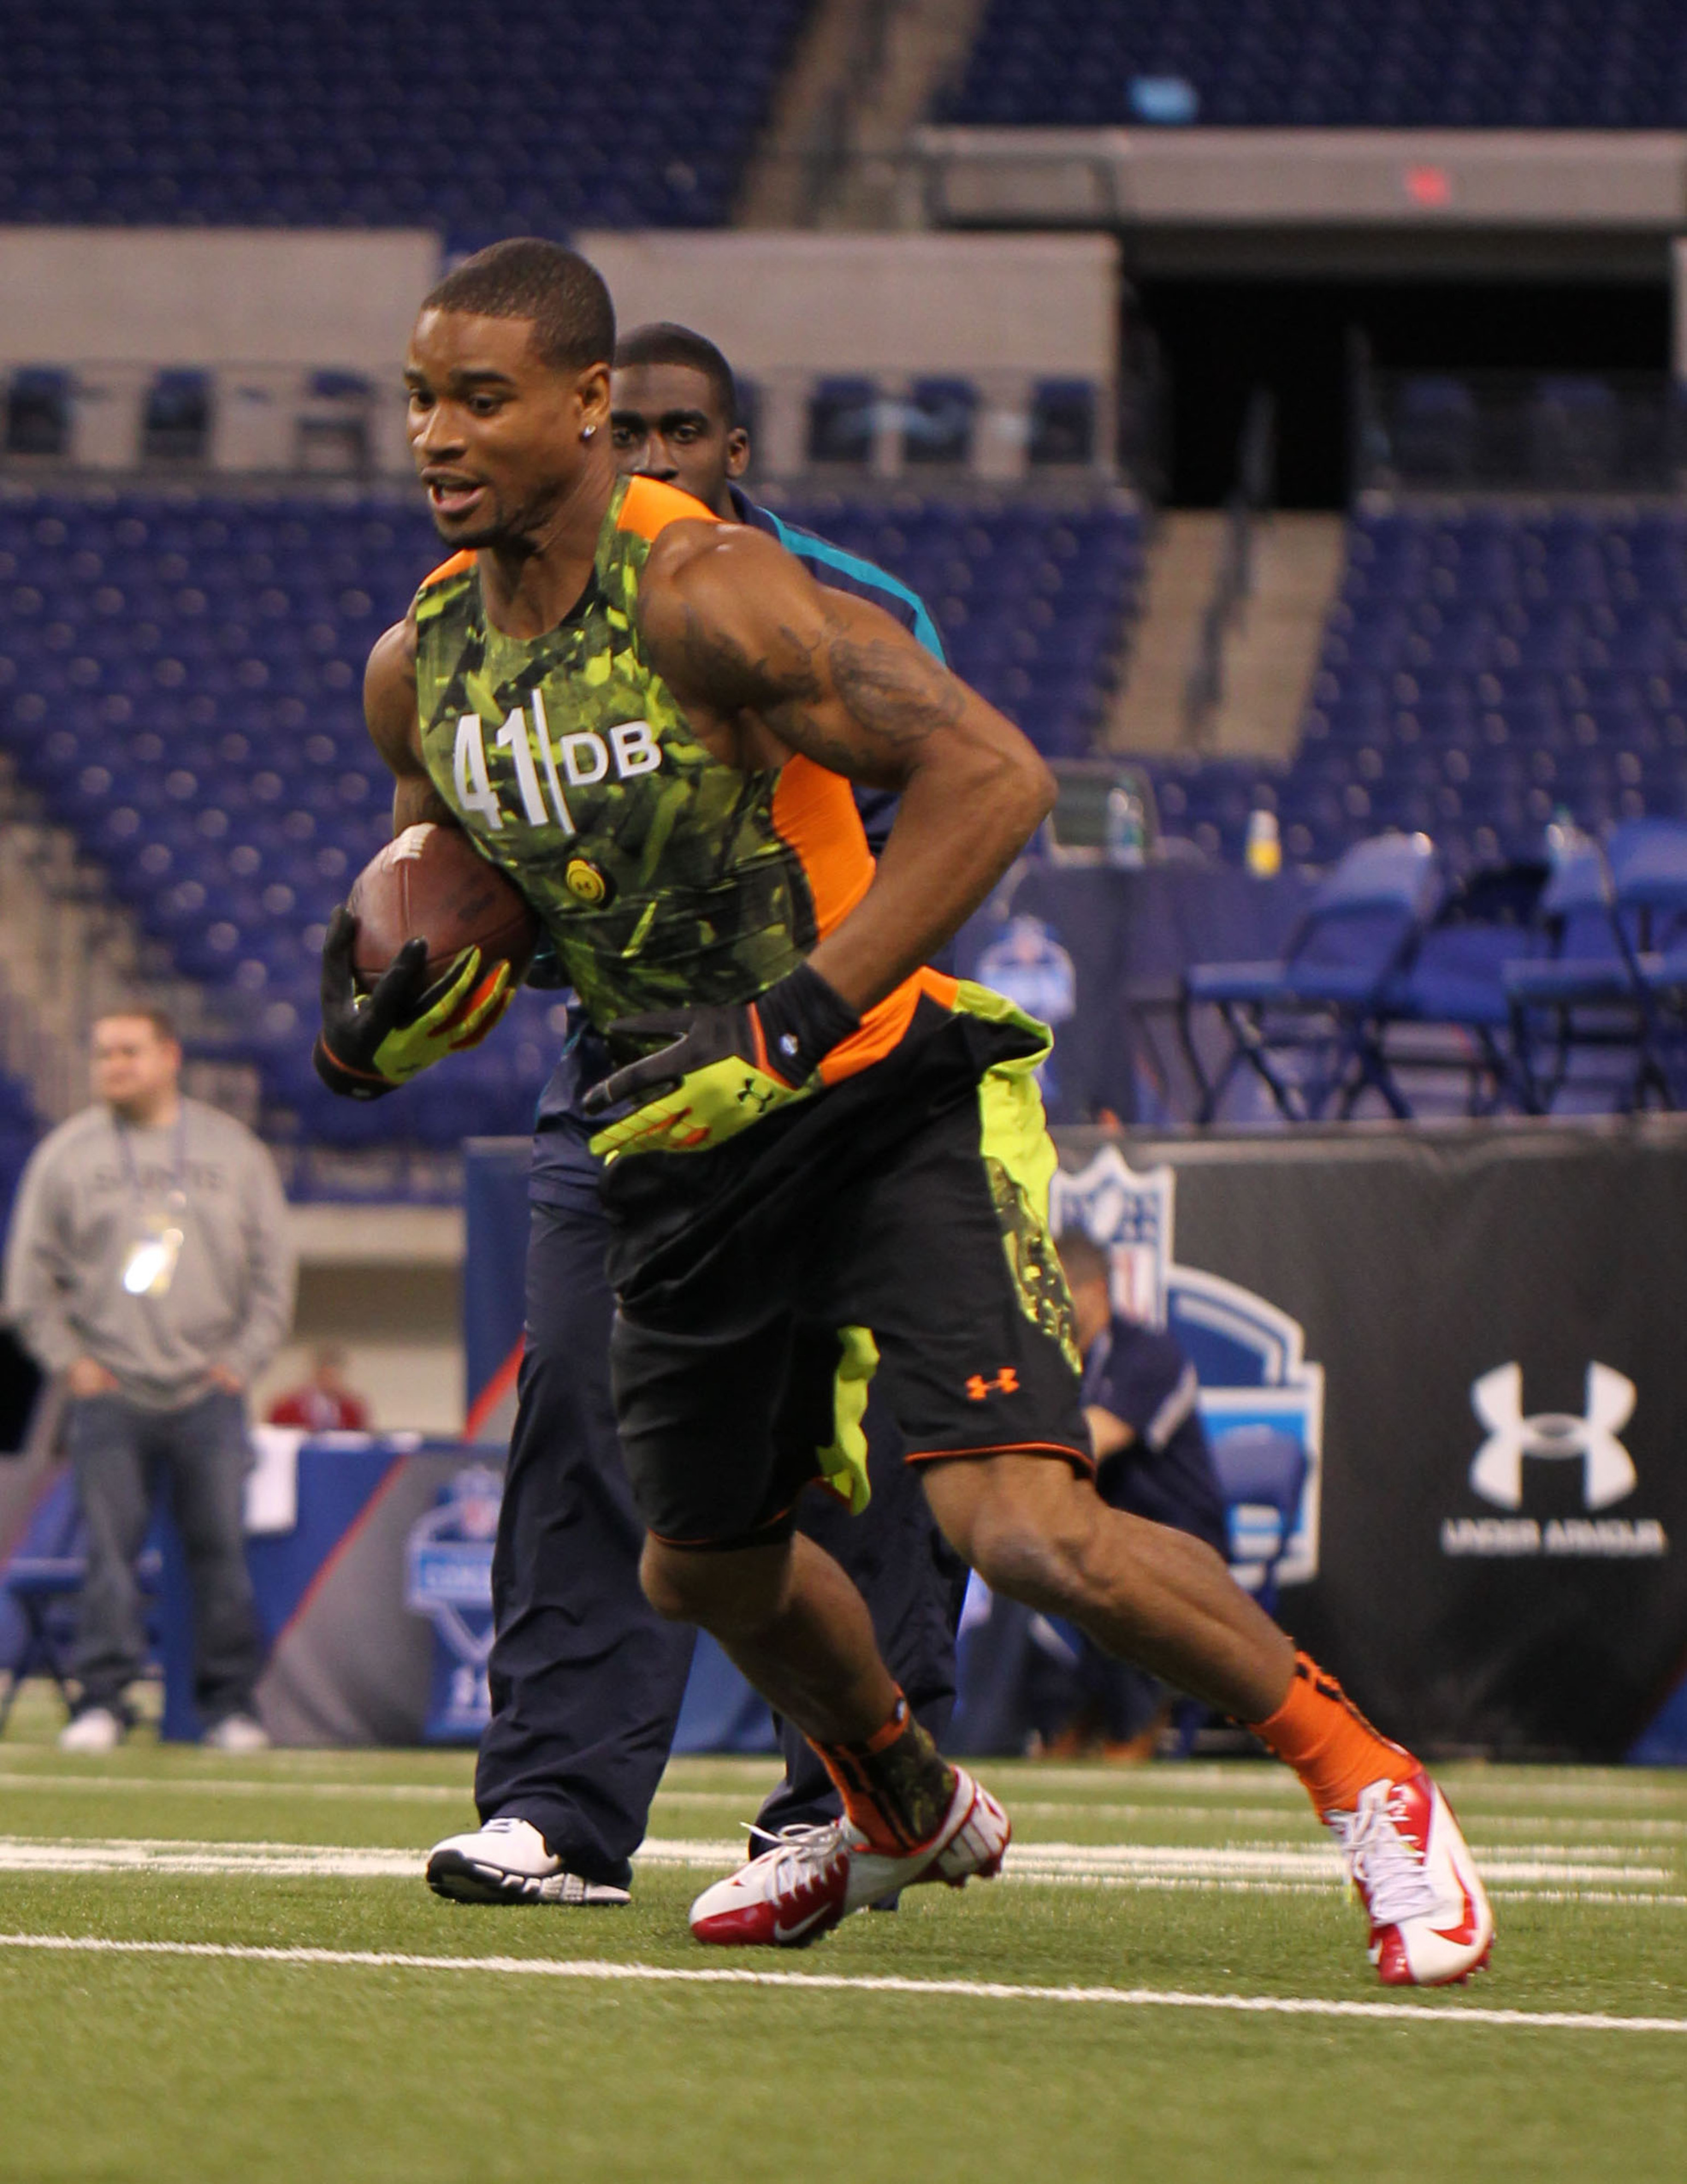 Slay shocked many at the combine today, registering the fastest 40 time among the DB group